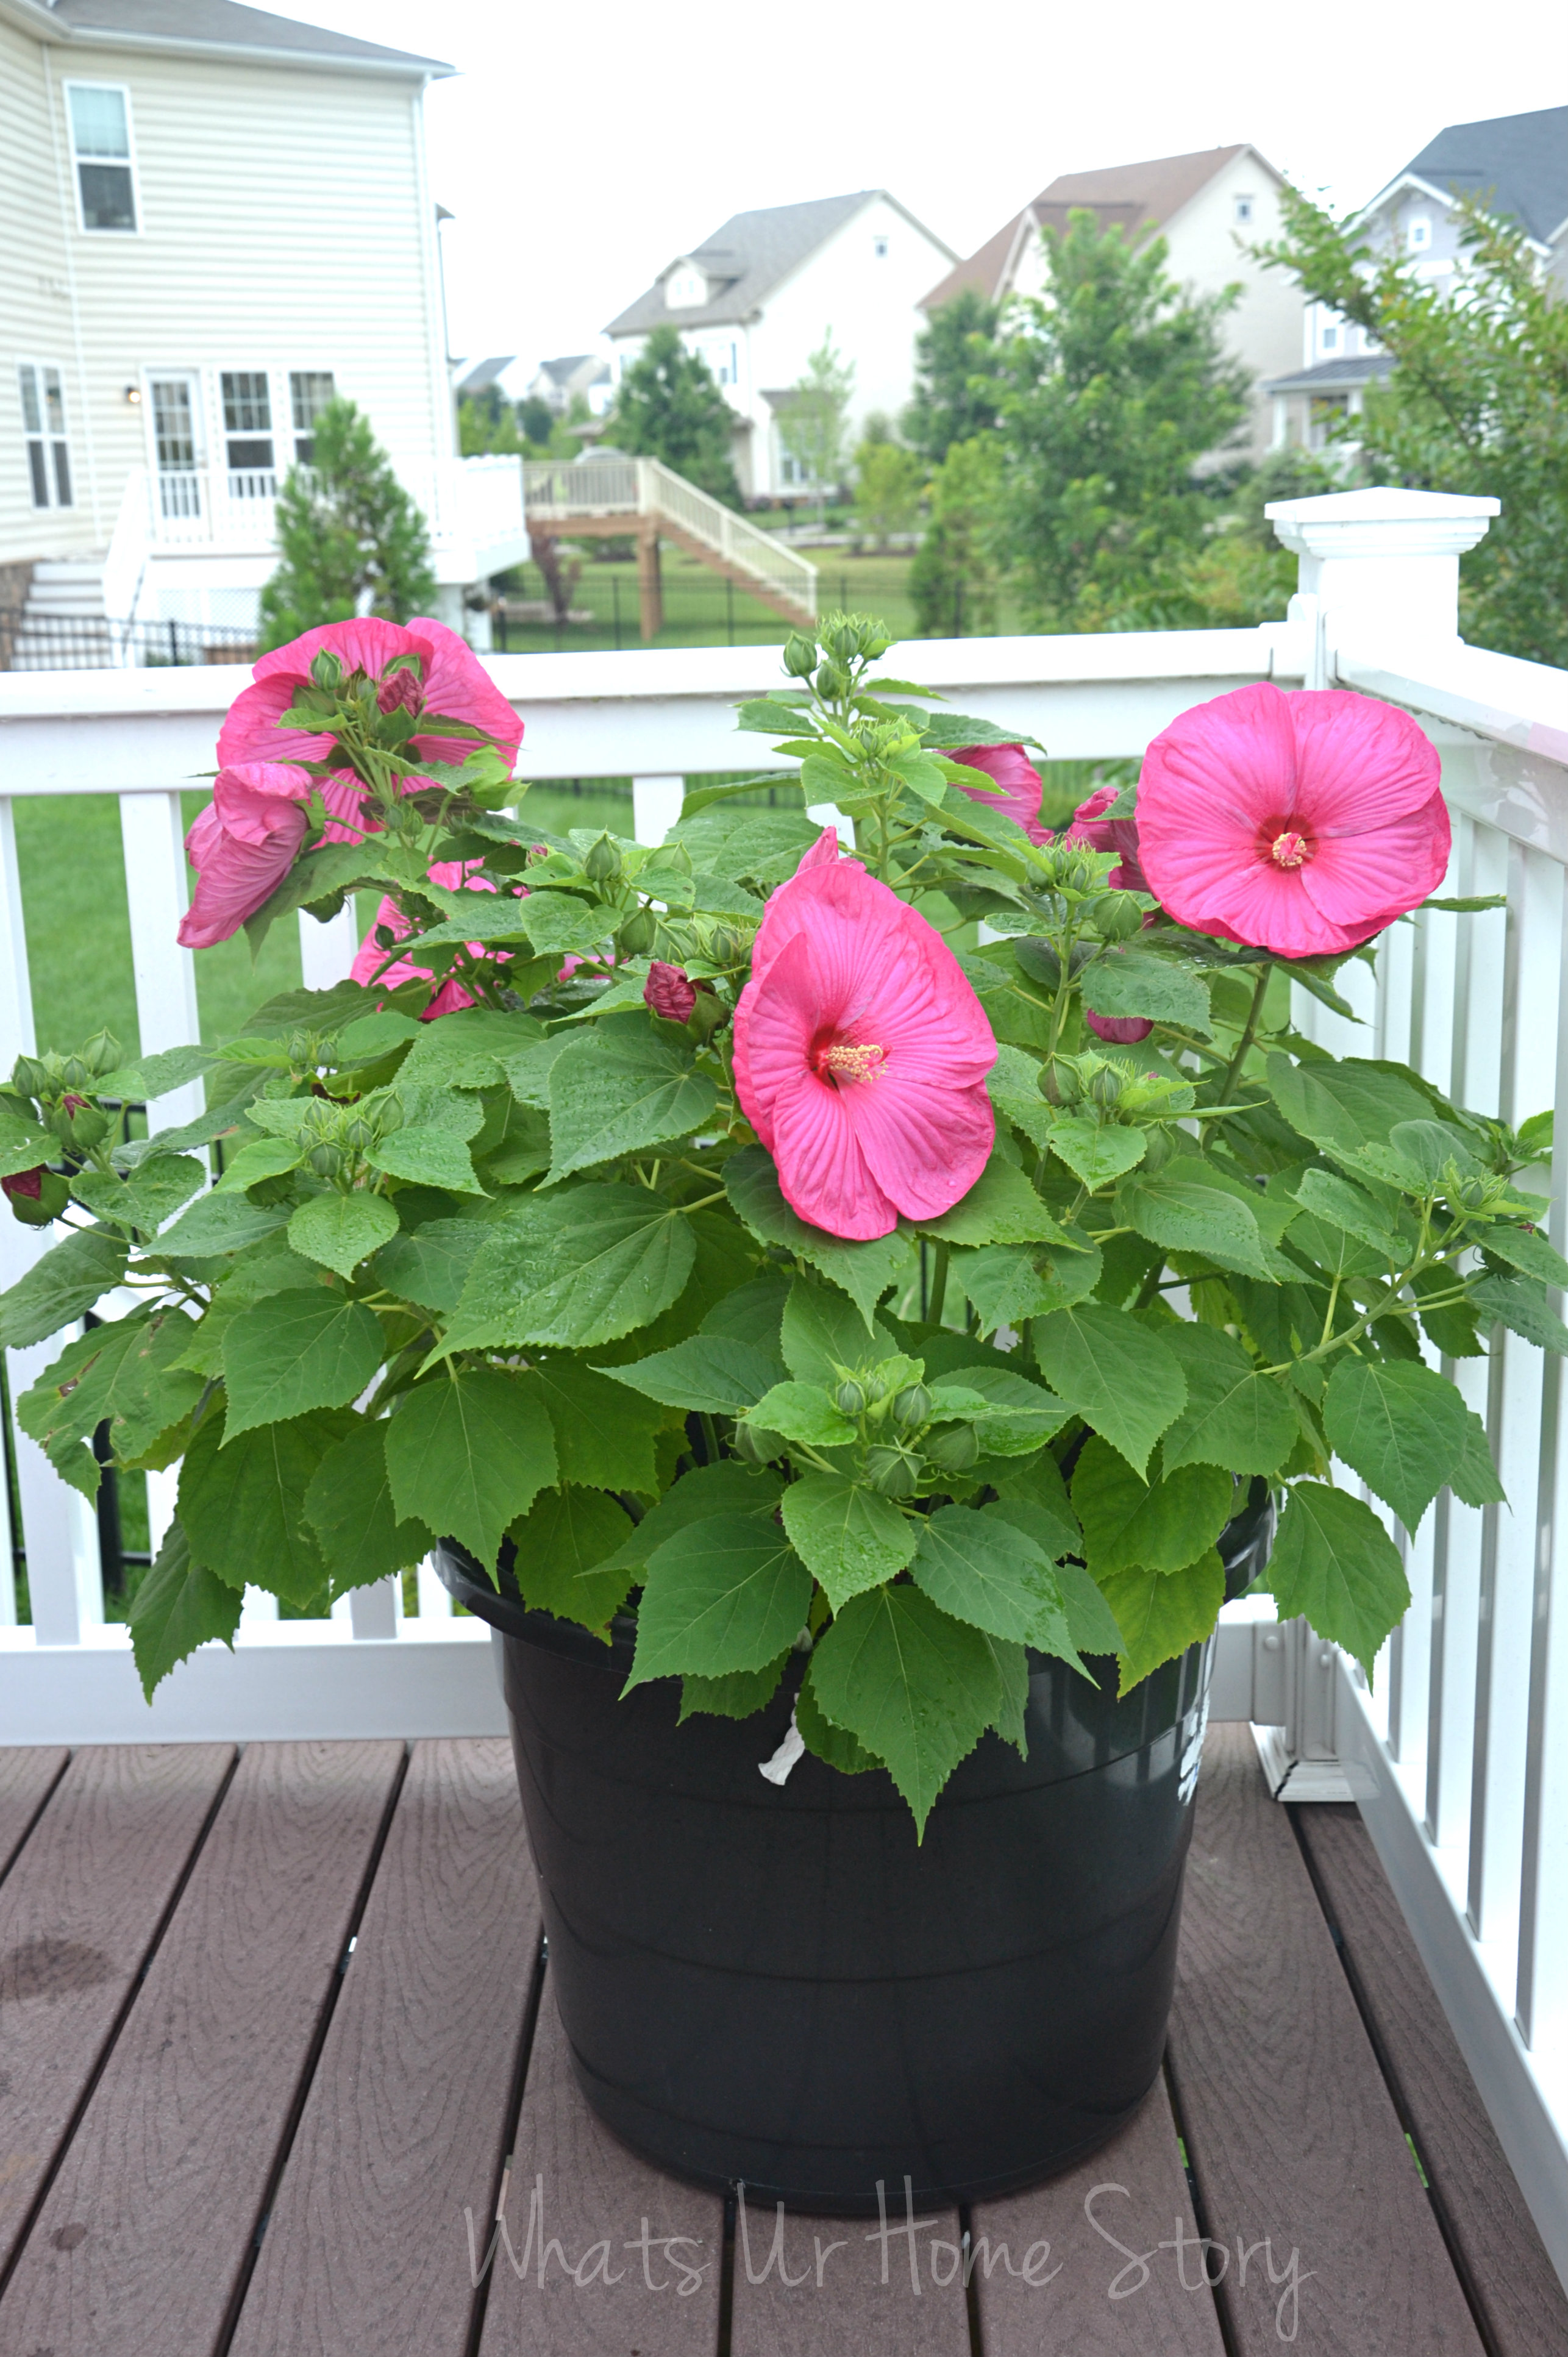 Turn a rope tub into a planter, dinner plate hibscus